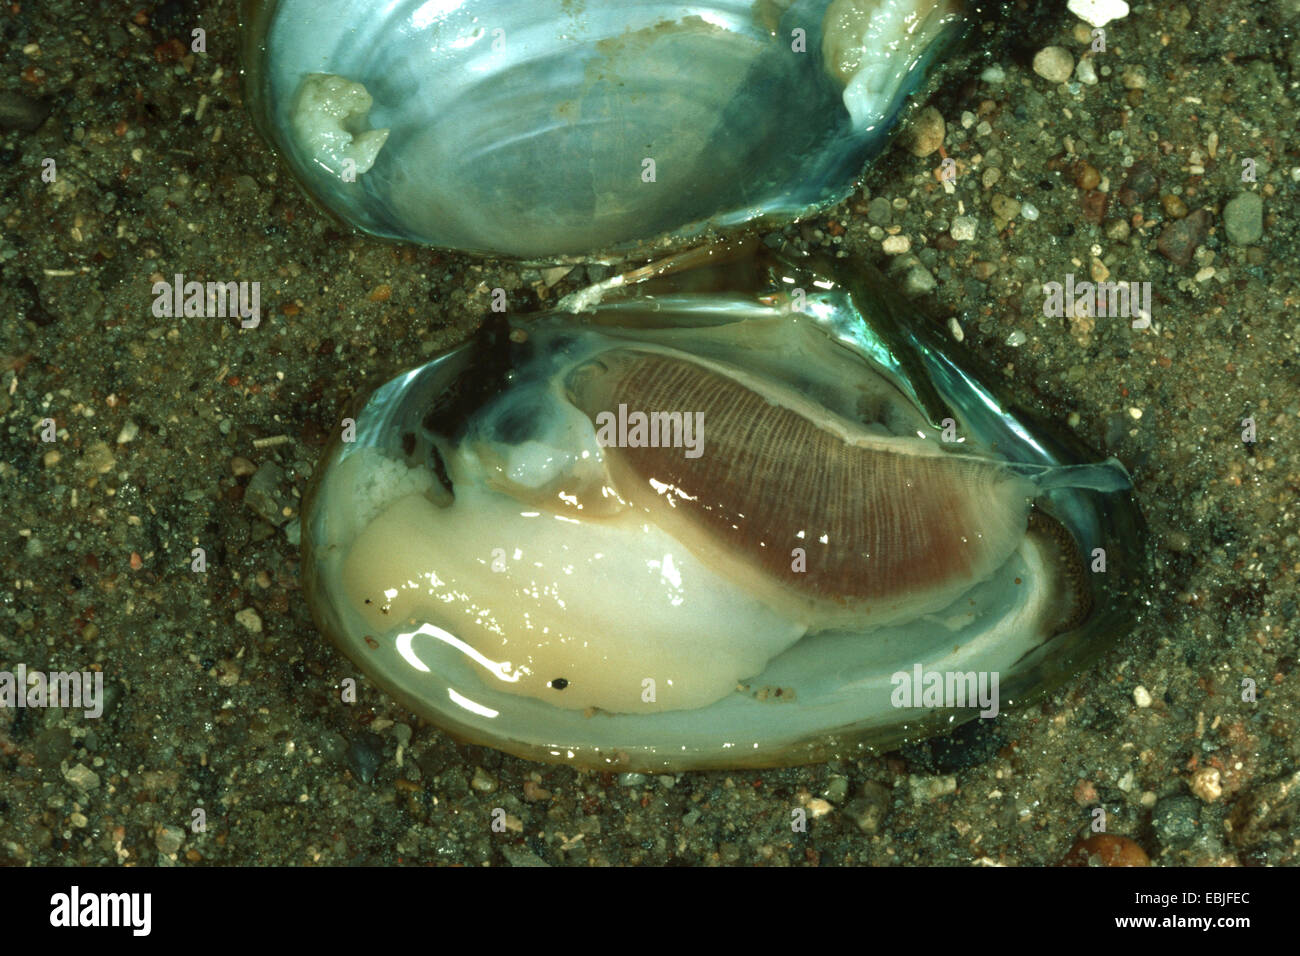 duck mussel (Anodonta anatina), lying open in the sand Stock Photo